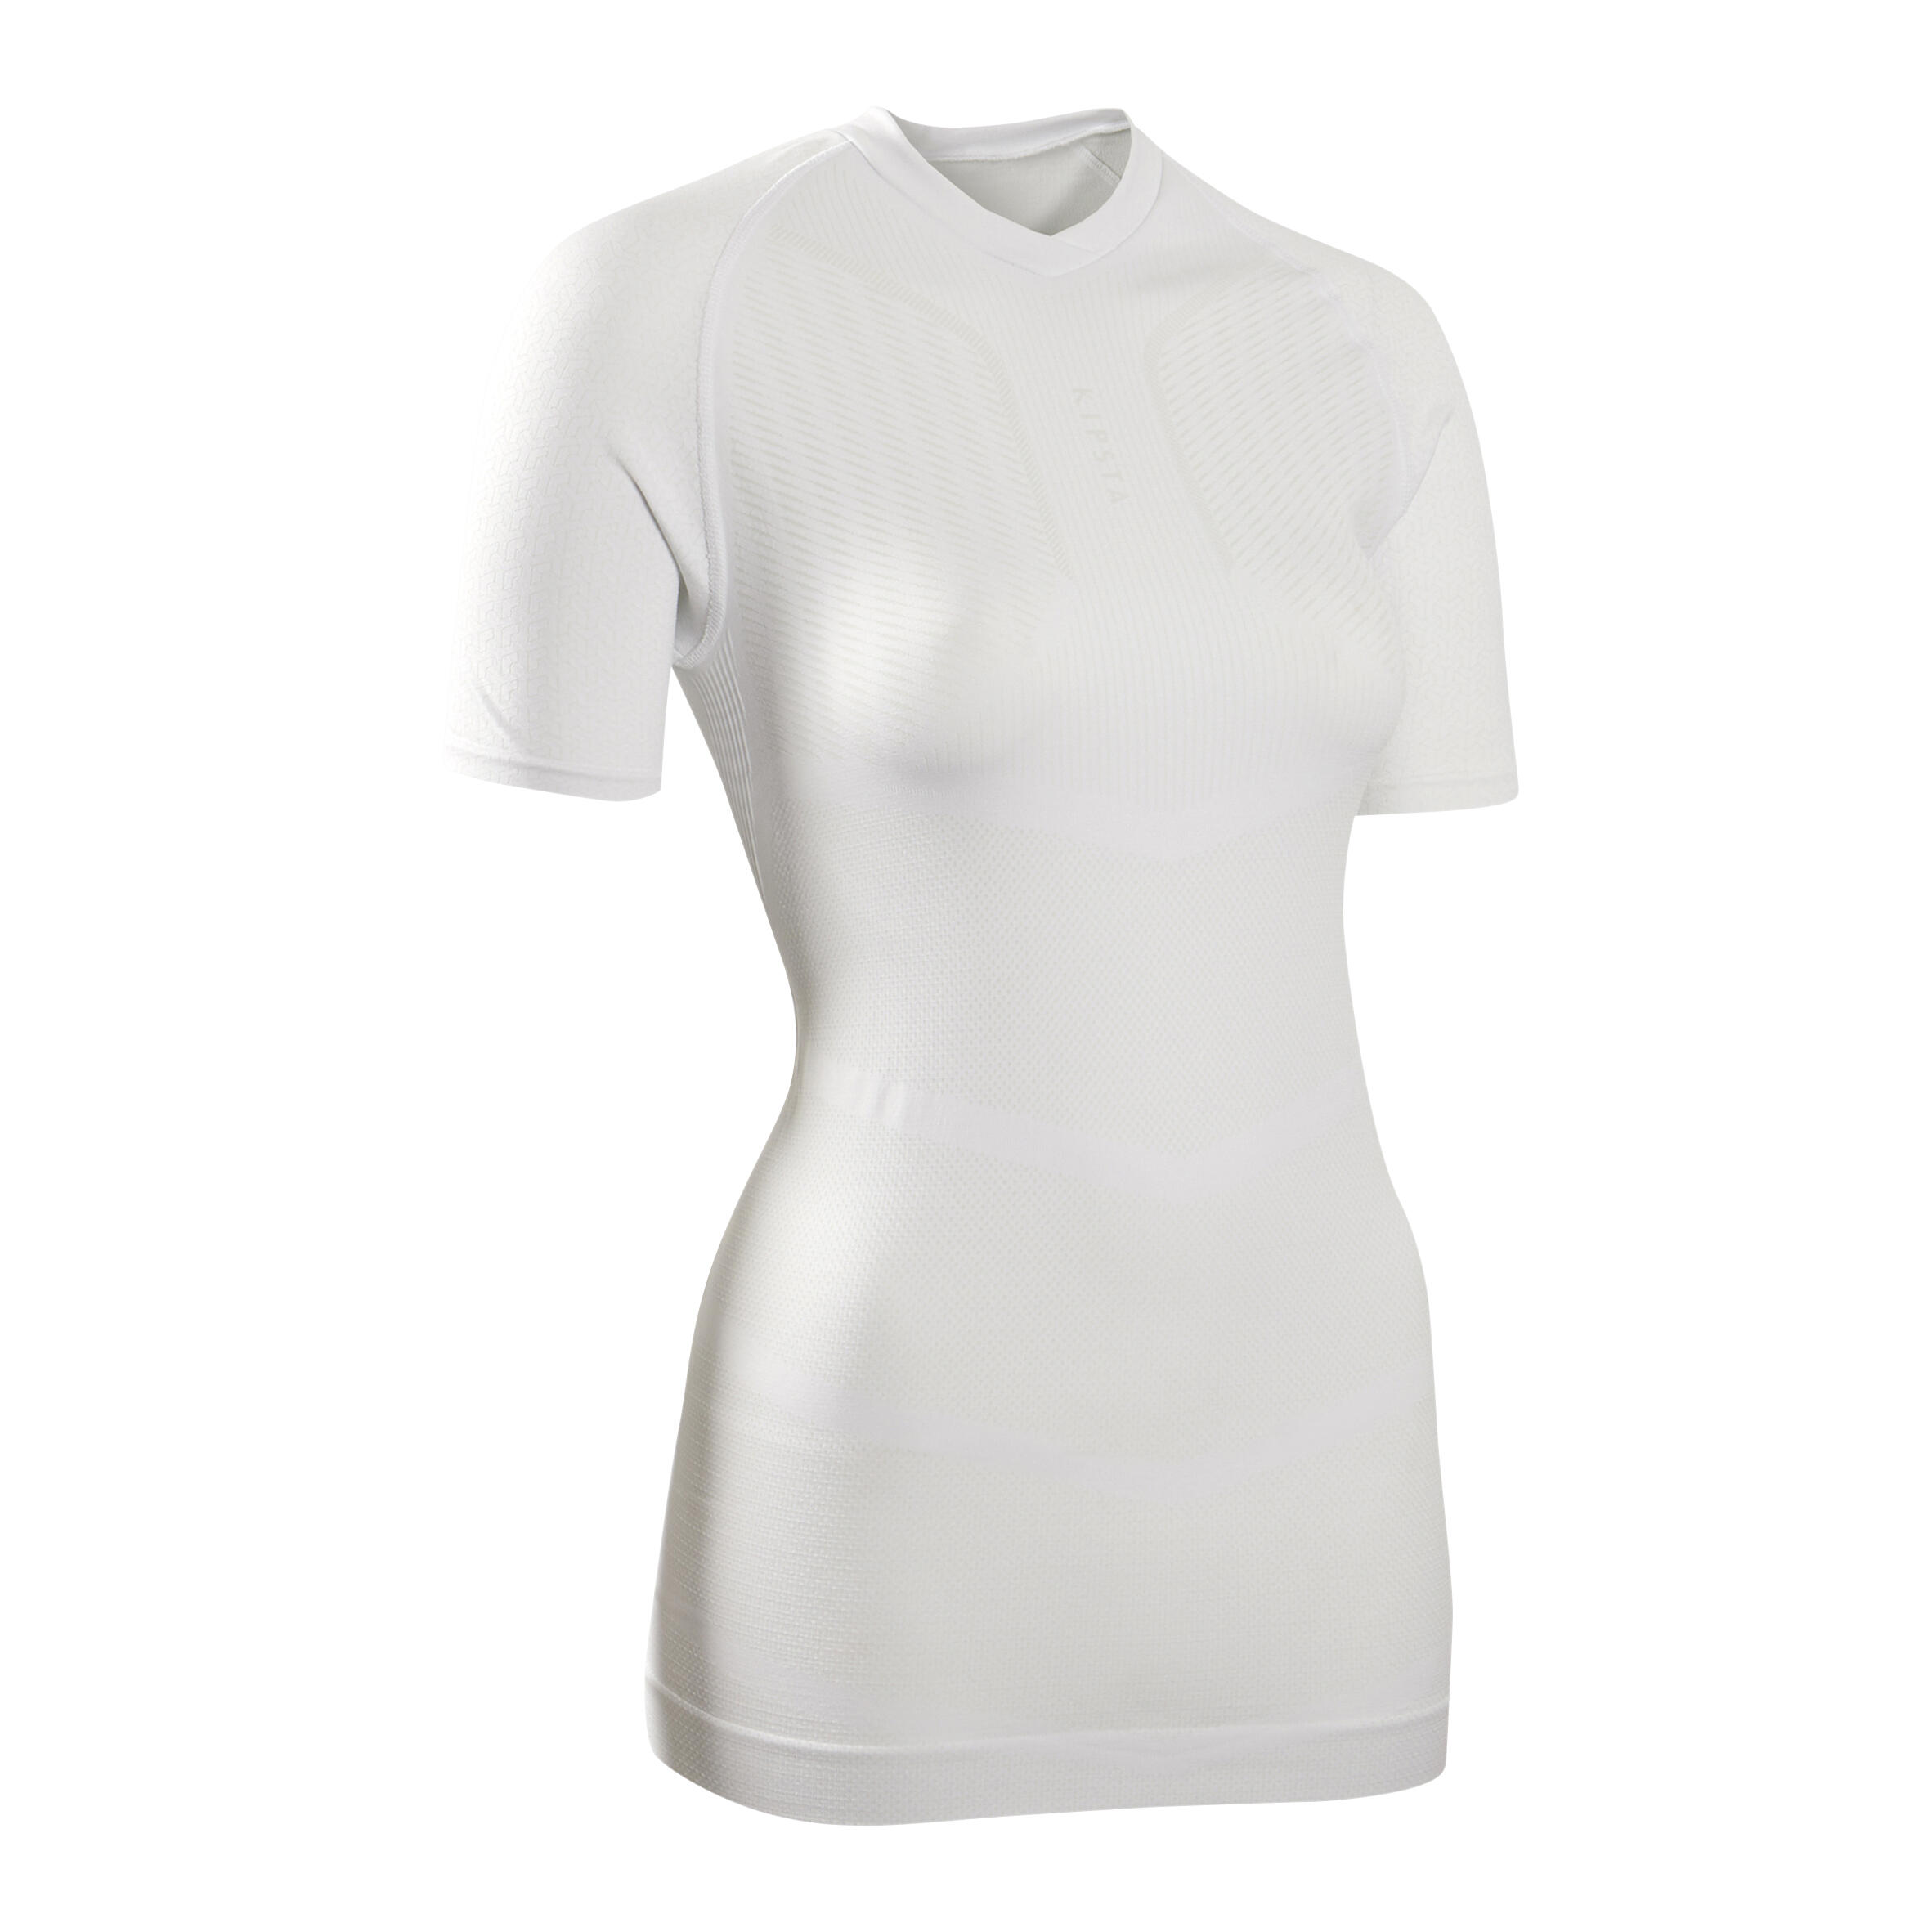 Adult Short-Sleeved Thermal Base Layer Top Keepdry 500 - White 2/7